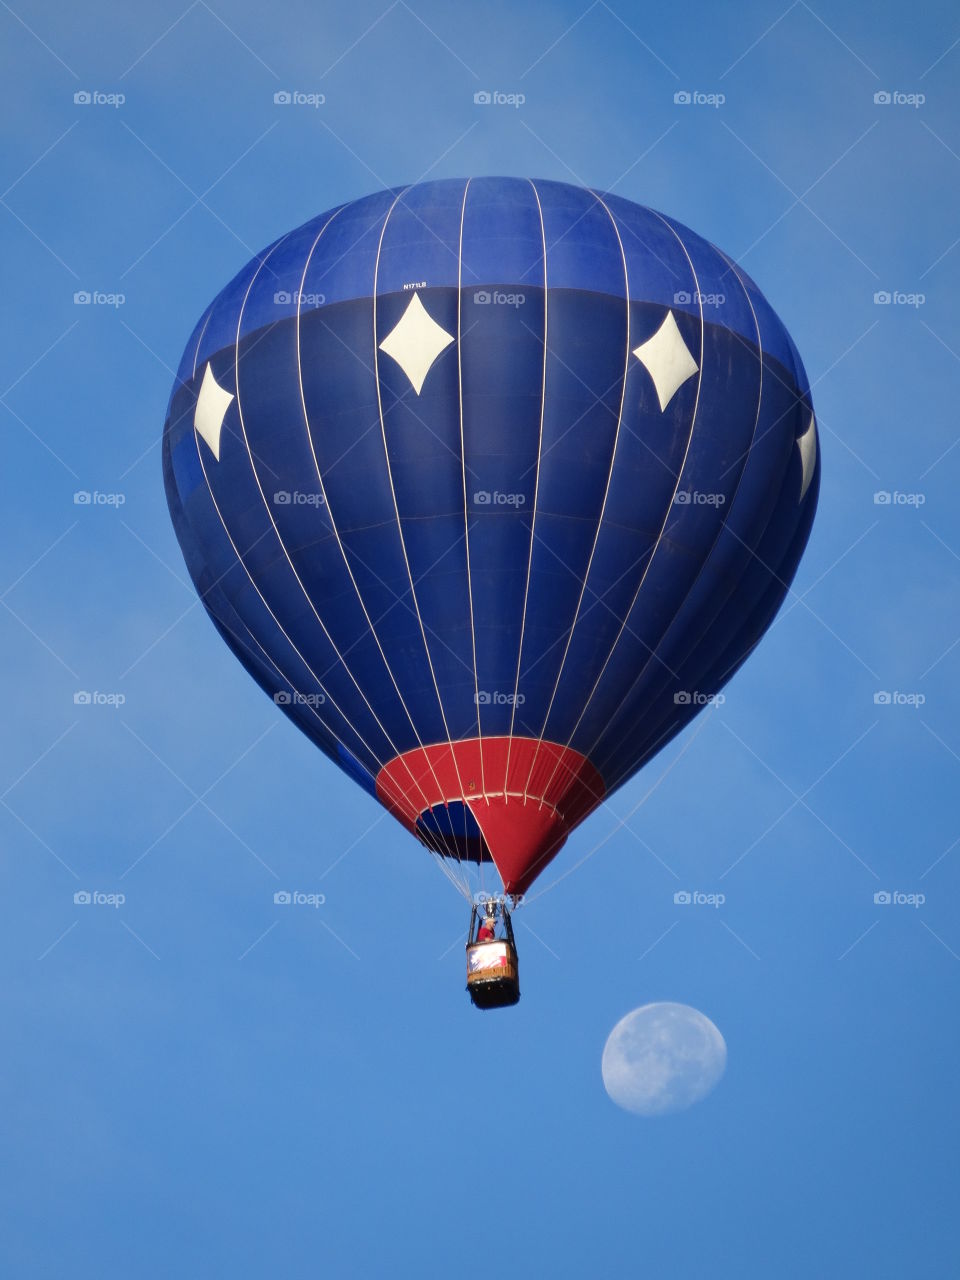 Blue hot air balloon flying in the air